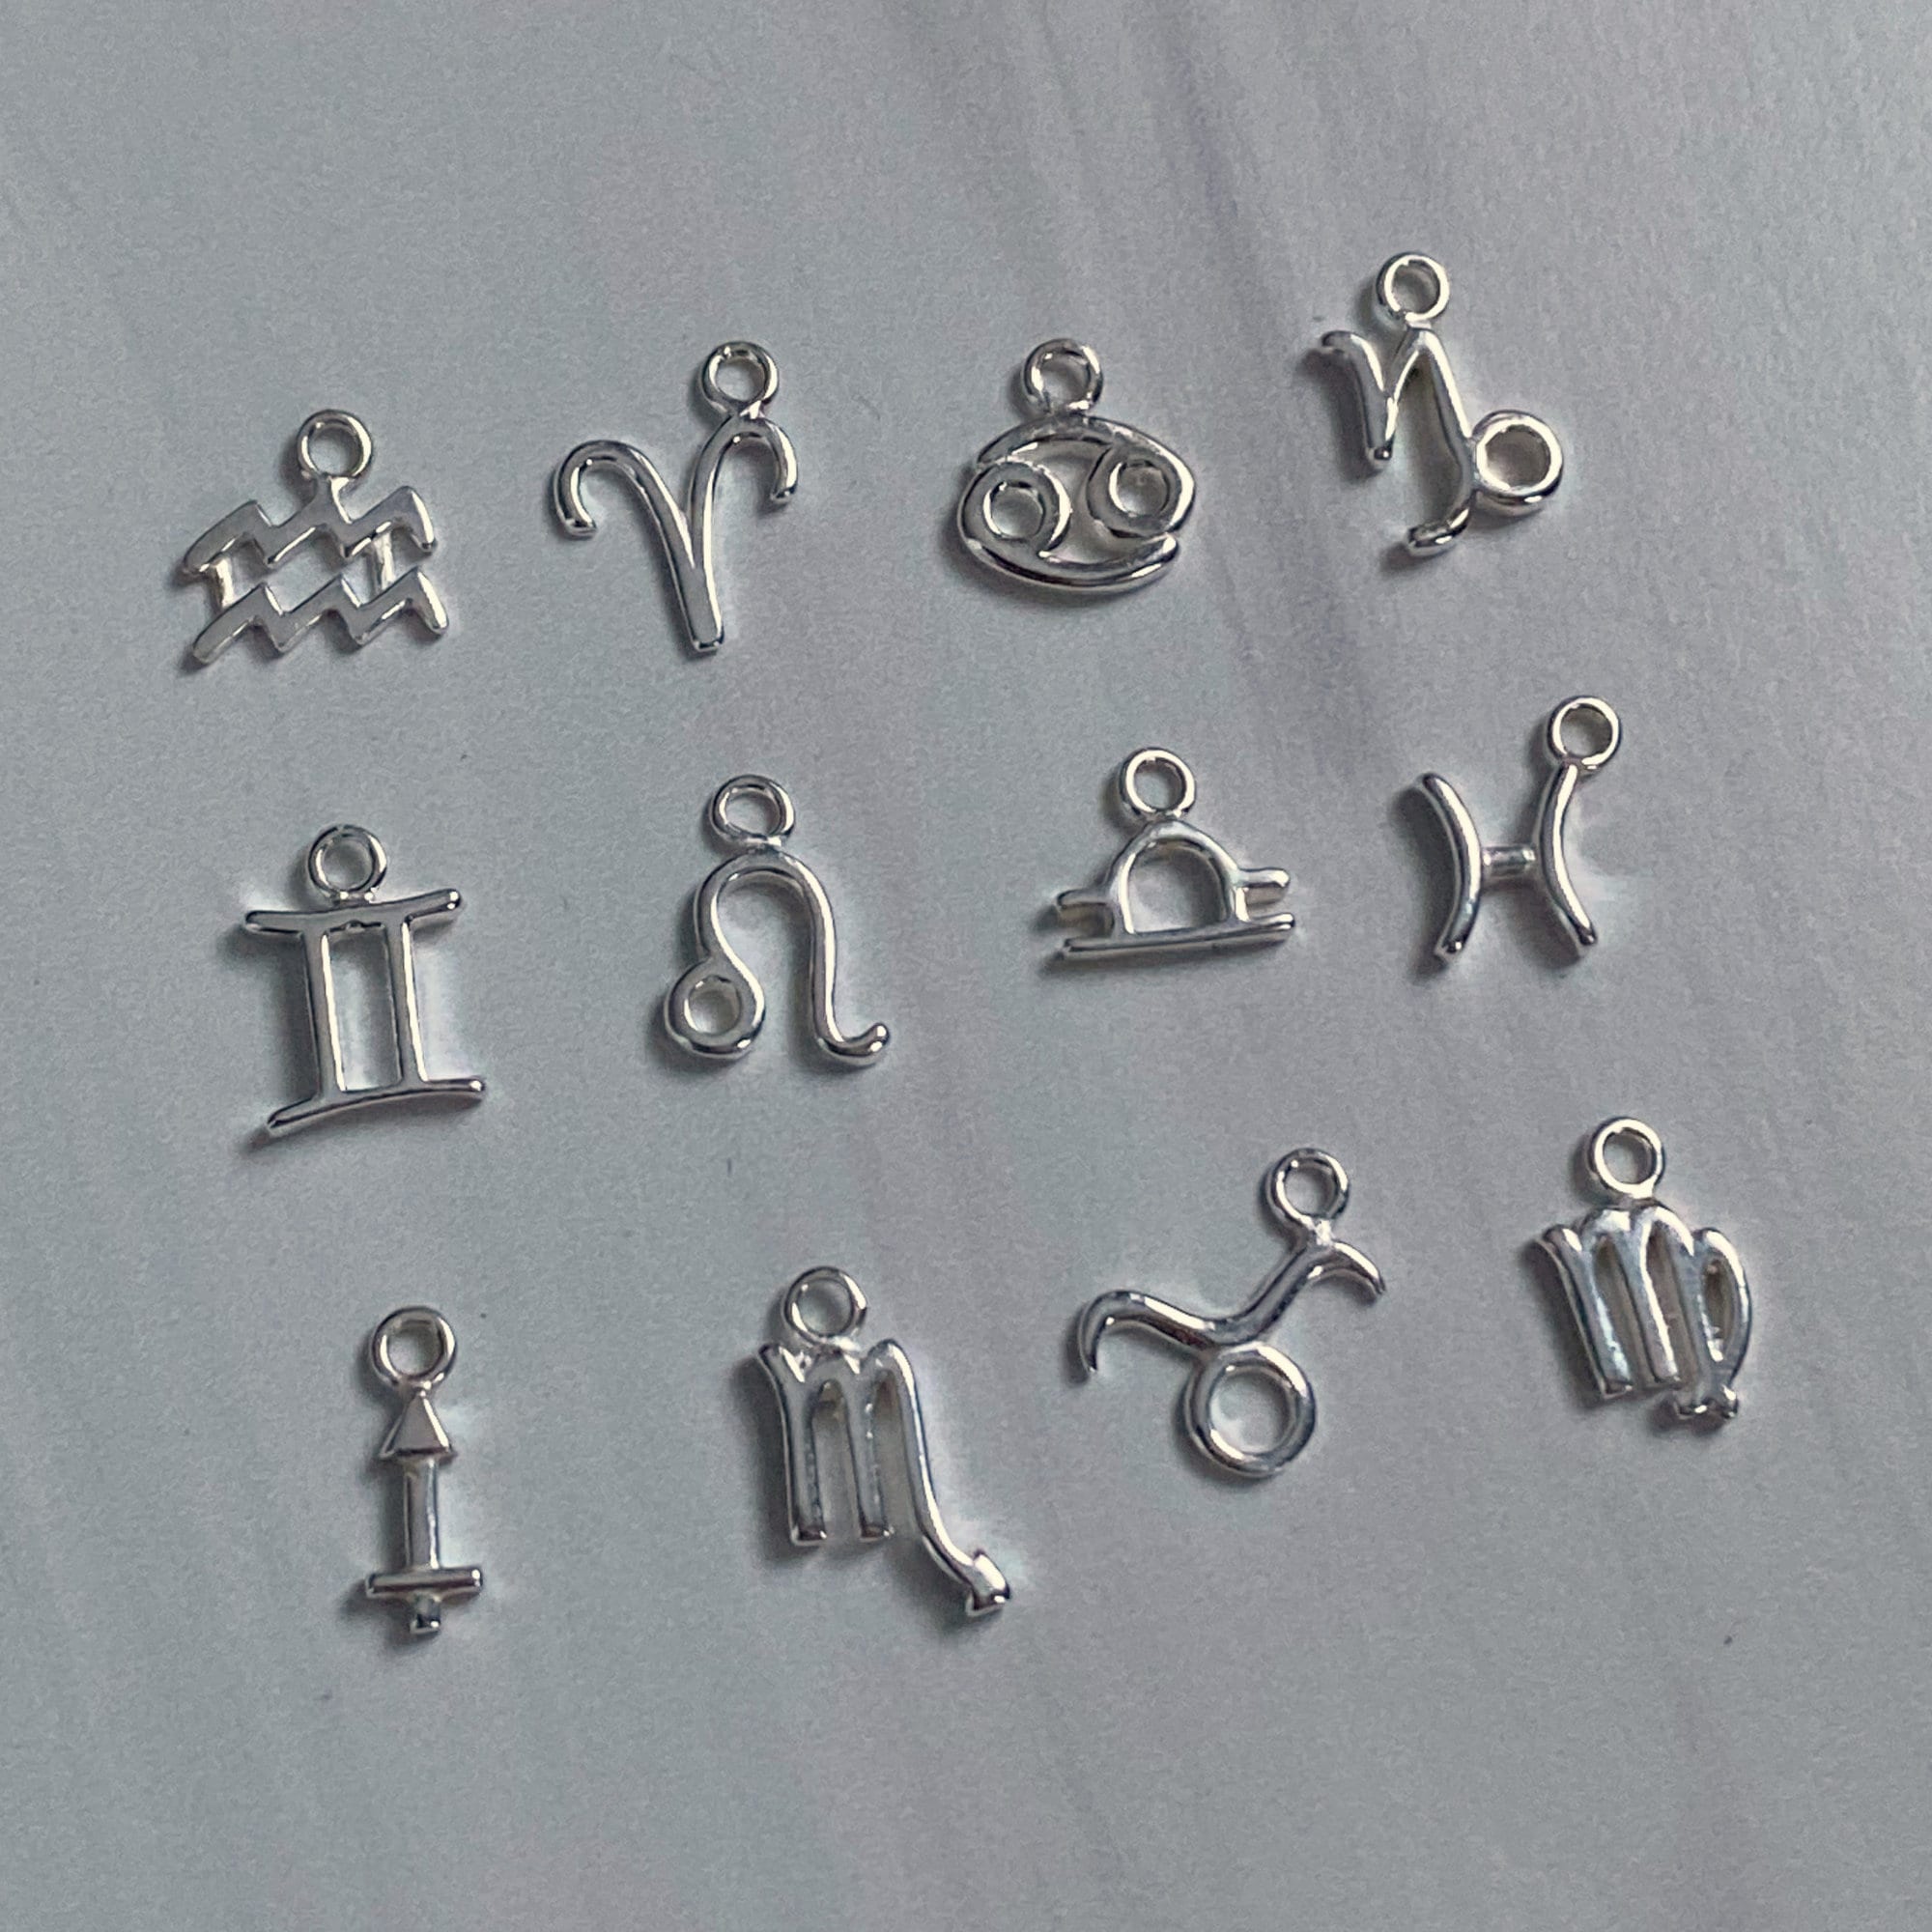 JIALEEY Wholesale Bulk Lots Jewelry Making Silver Zodiac Sign Charms Smooth Tibetan Silver Metal Horoscope Charms Pendants DIY for Necklace Bracelet